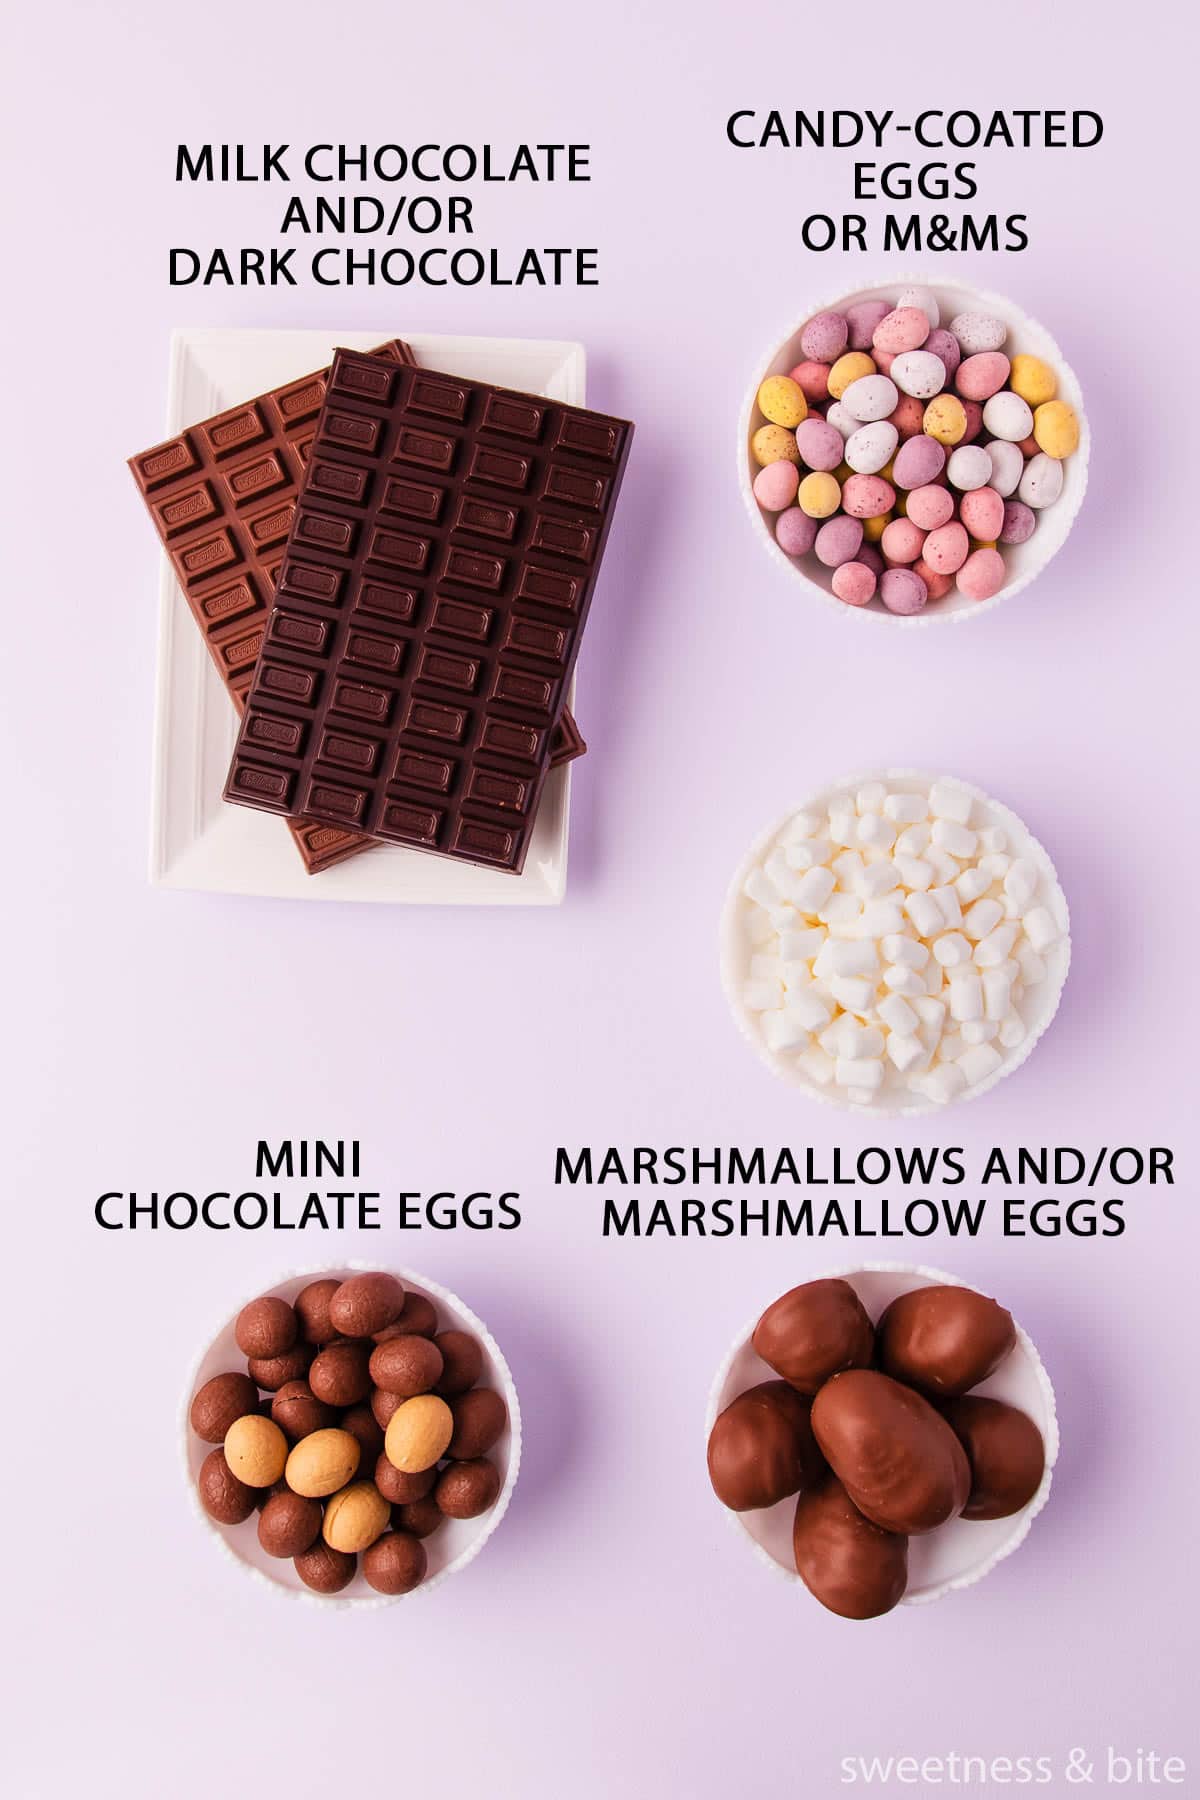 The rocky road ingredient - bars of milk and dark chocolate, and white bowls of mini eggs, marshmallow eggs and mini marshmallows, on a light purple background with black text labels.